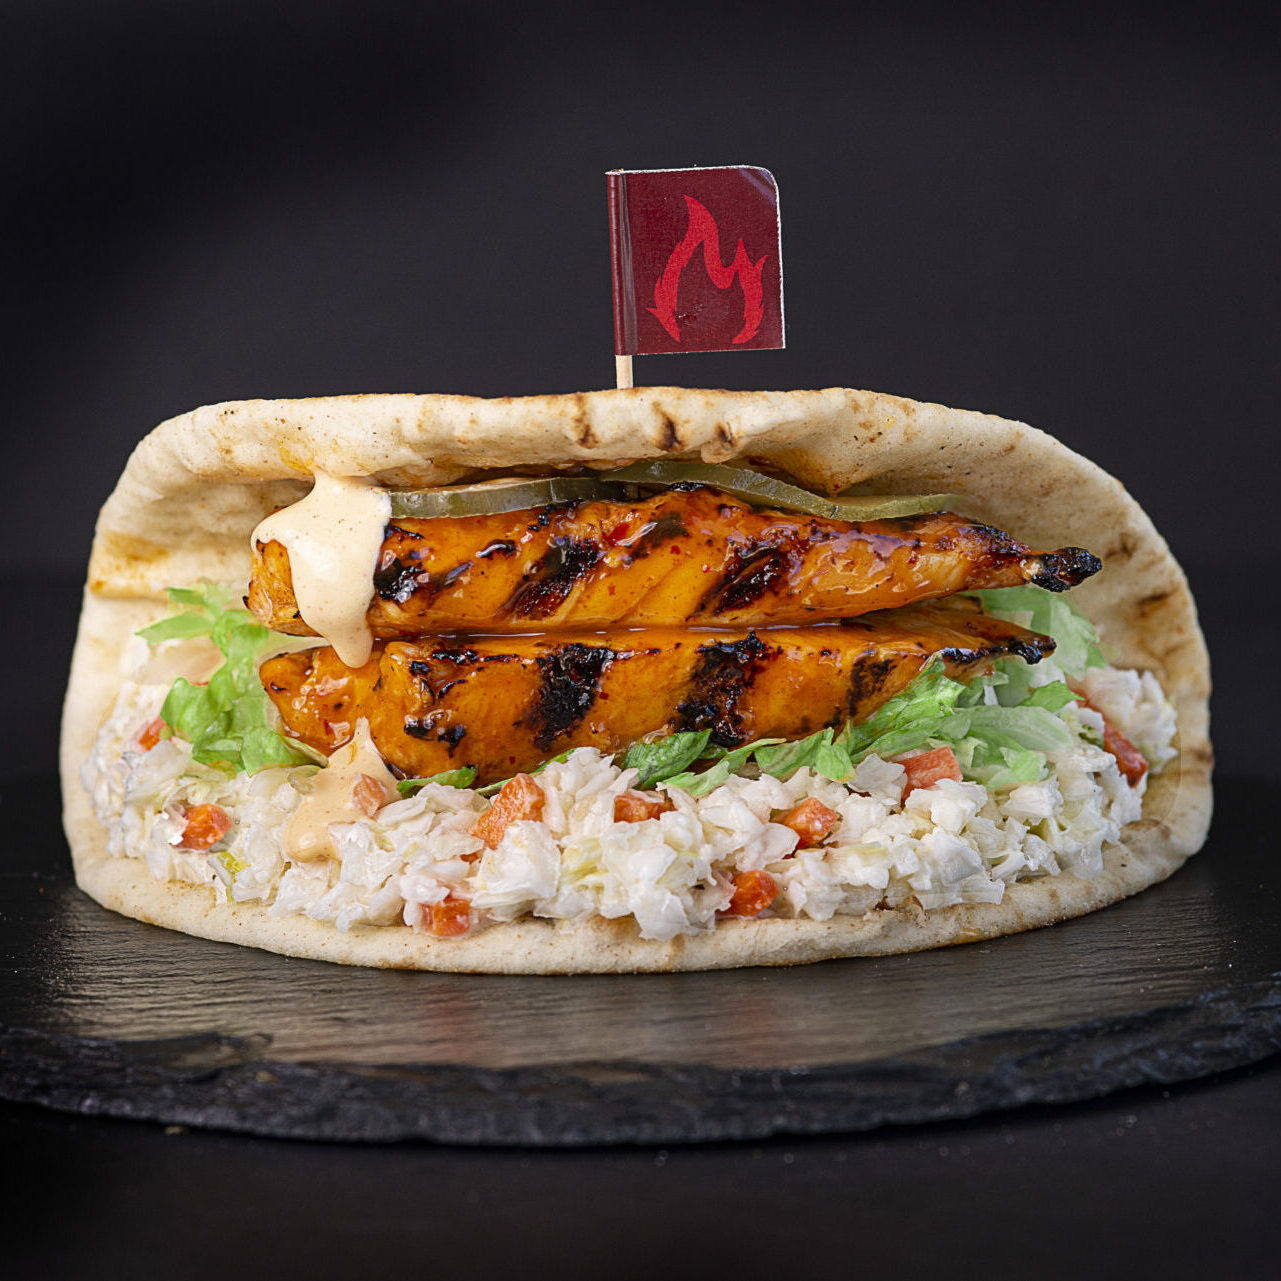 A pita sandwich with rice and chicken on top.